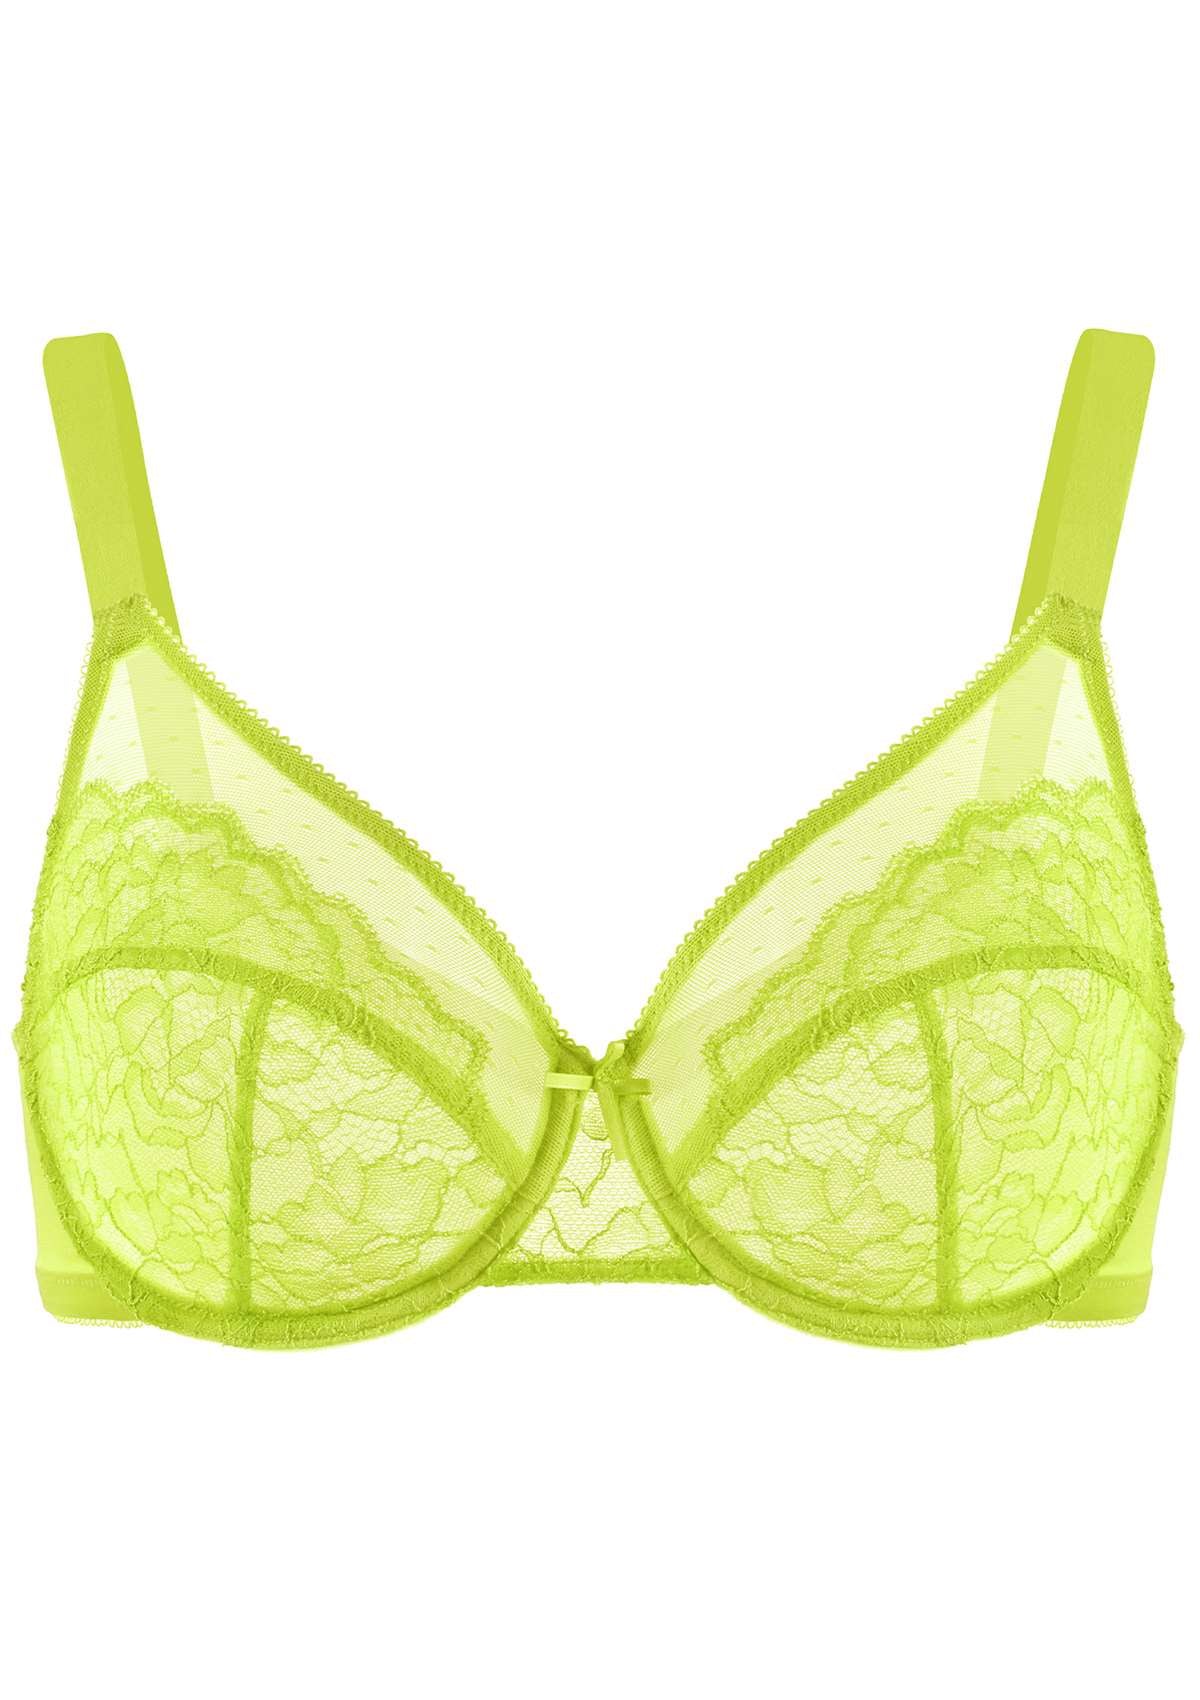 HSIA Enchante Full Cup Minimizing Bra: Supportive Unlined Lace Bra - Lime Green / 38 / DD/E